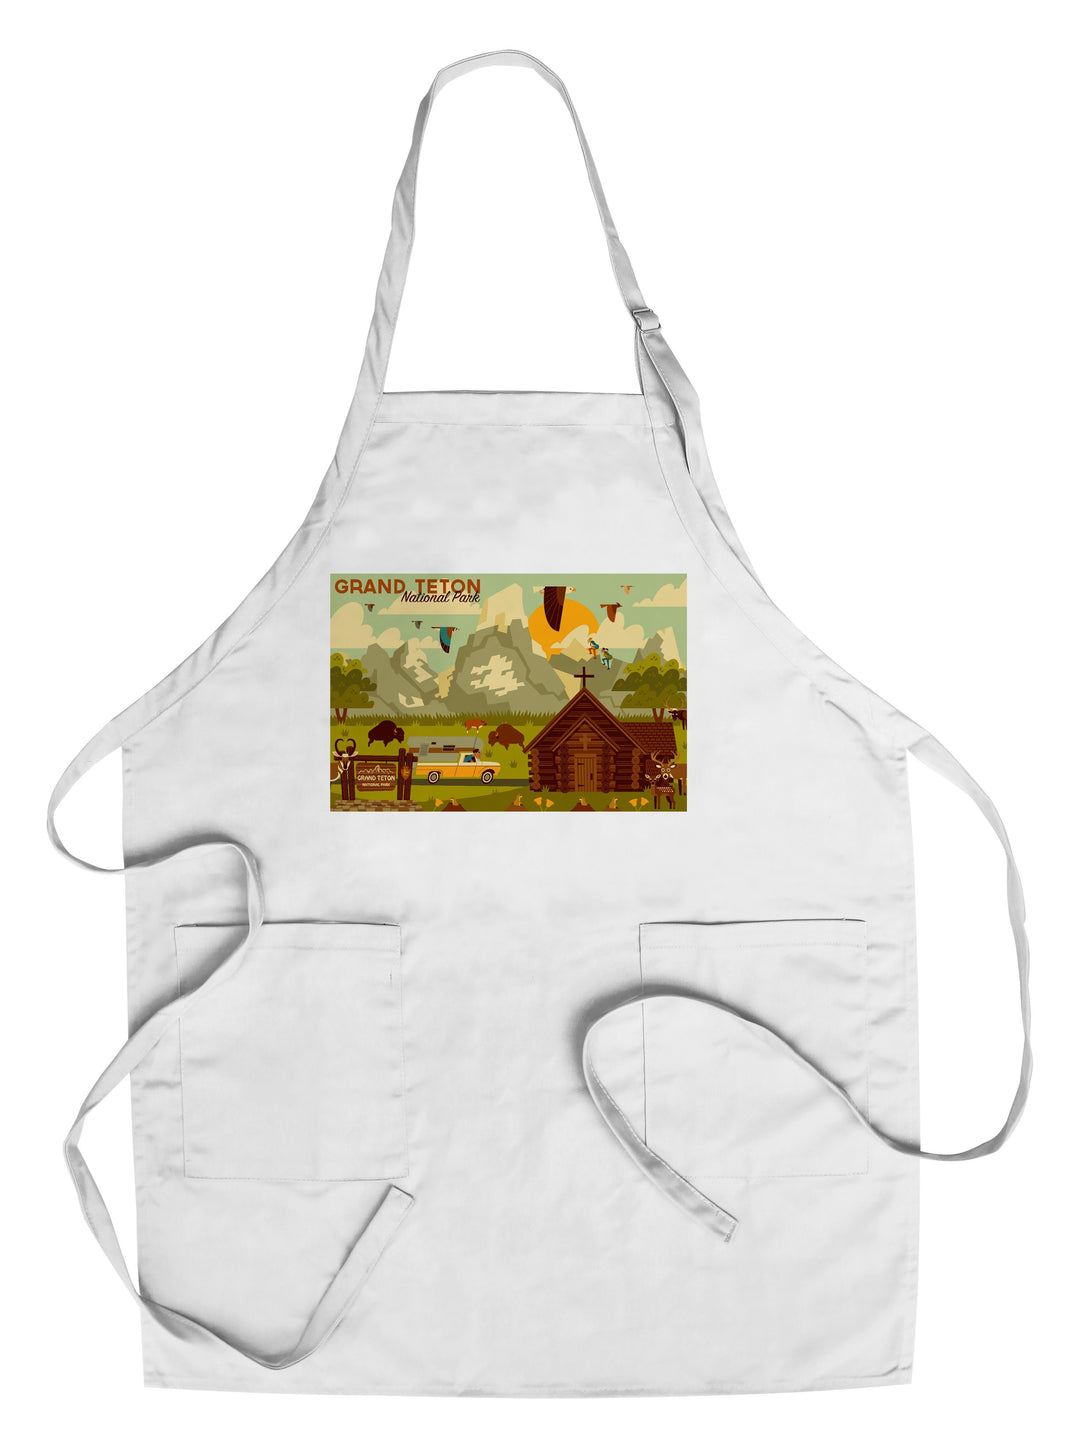 Grand Teton National Park, Wyoming, Geometric Experience Collection, Towels and Aprons Kitchen Lantern Press Chef's Apron 